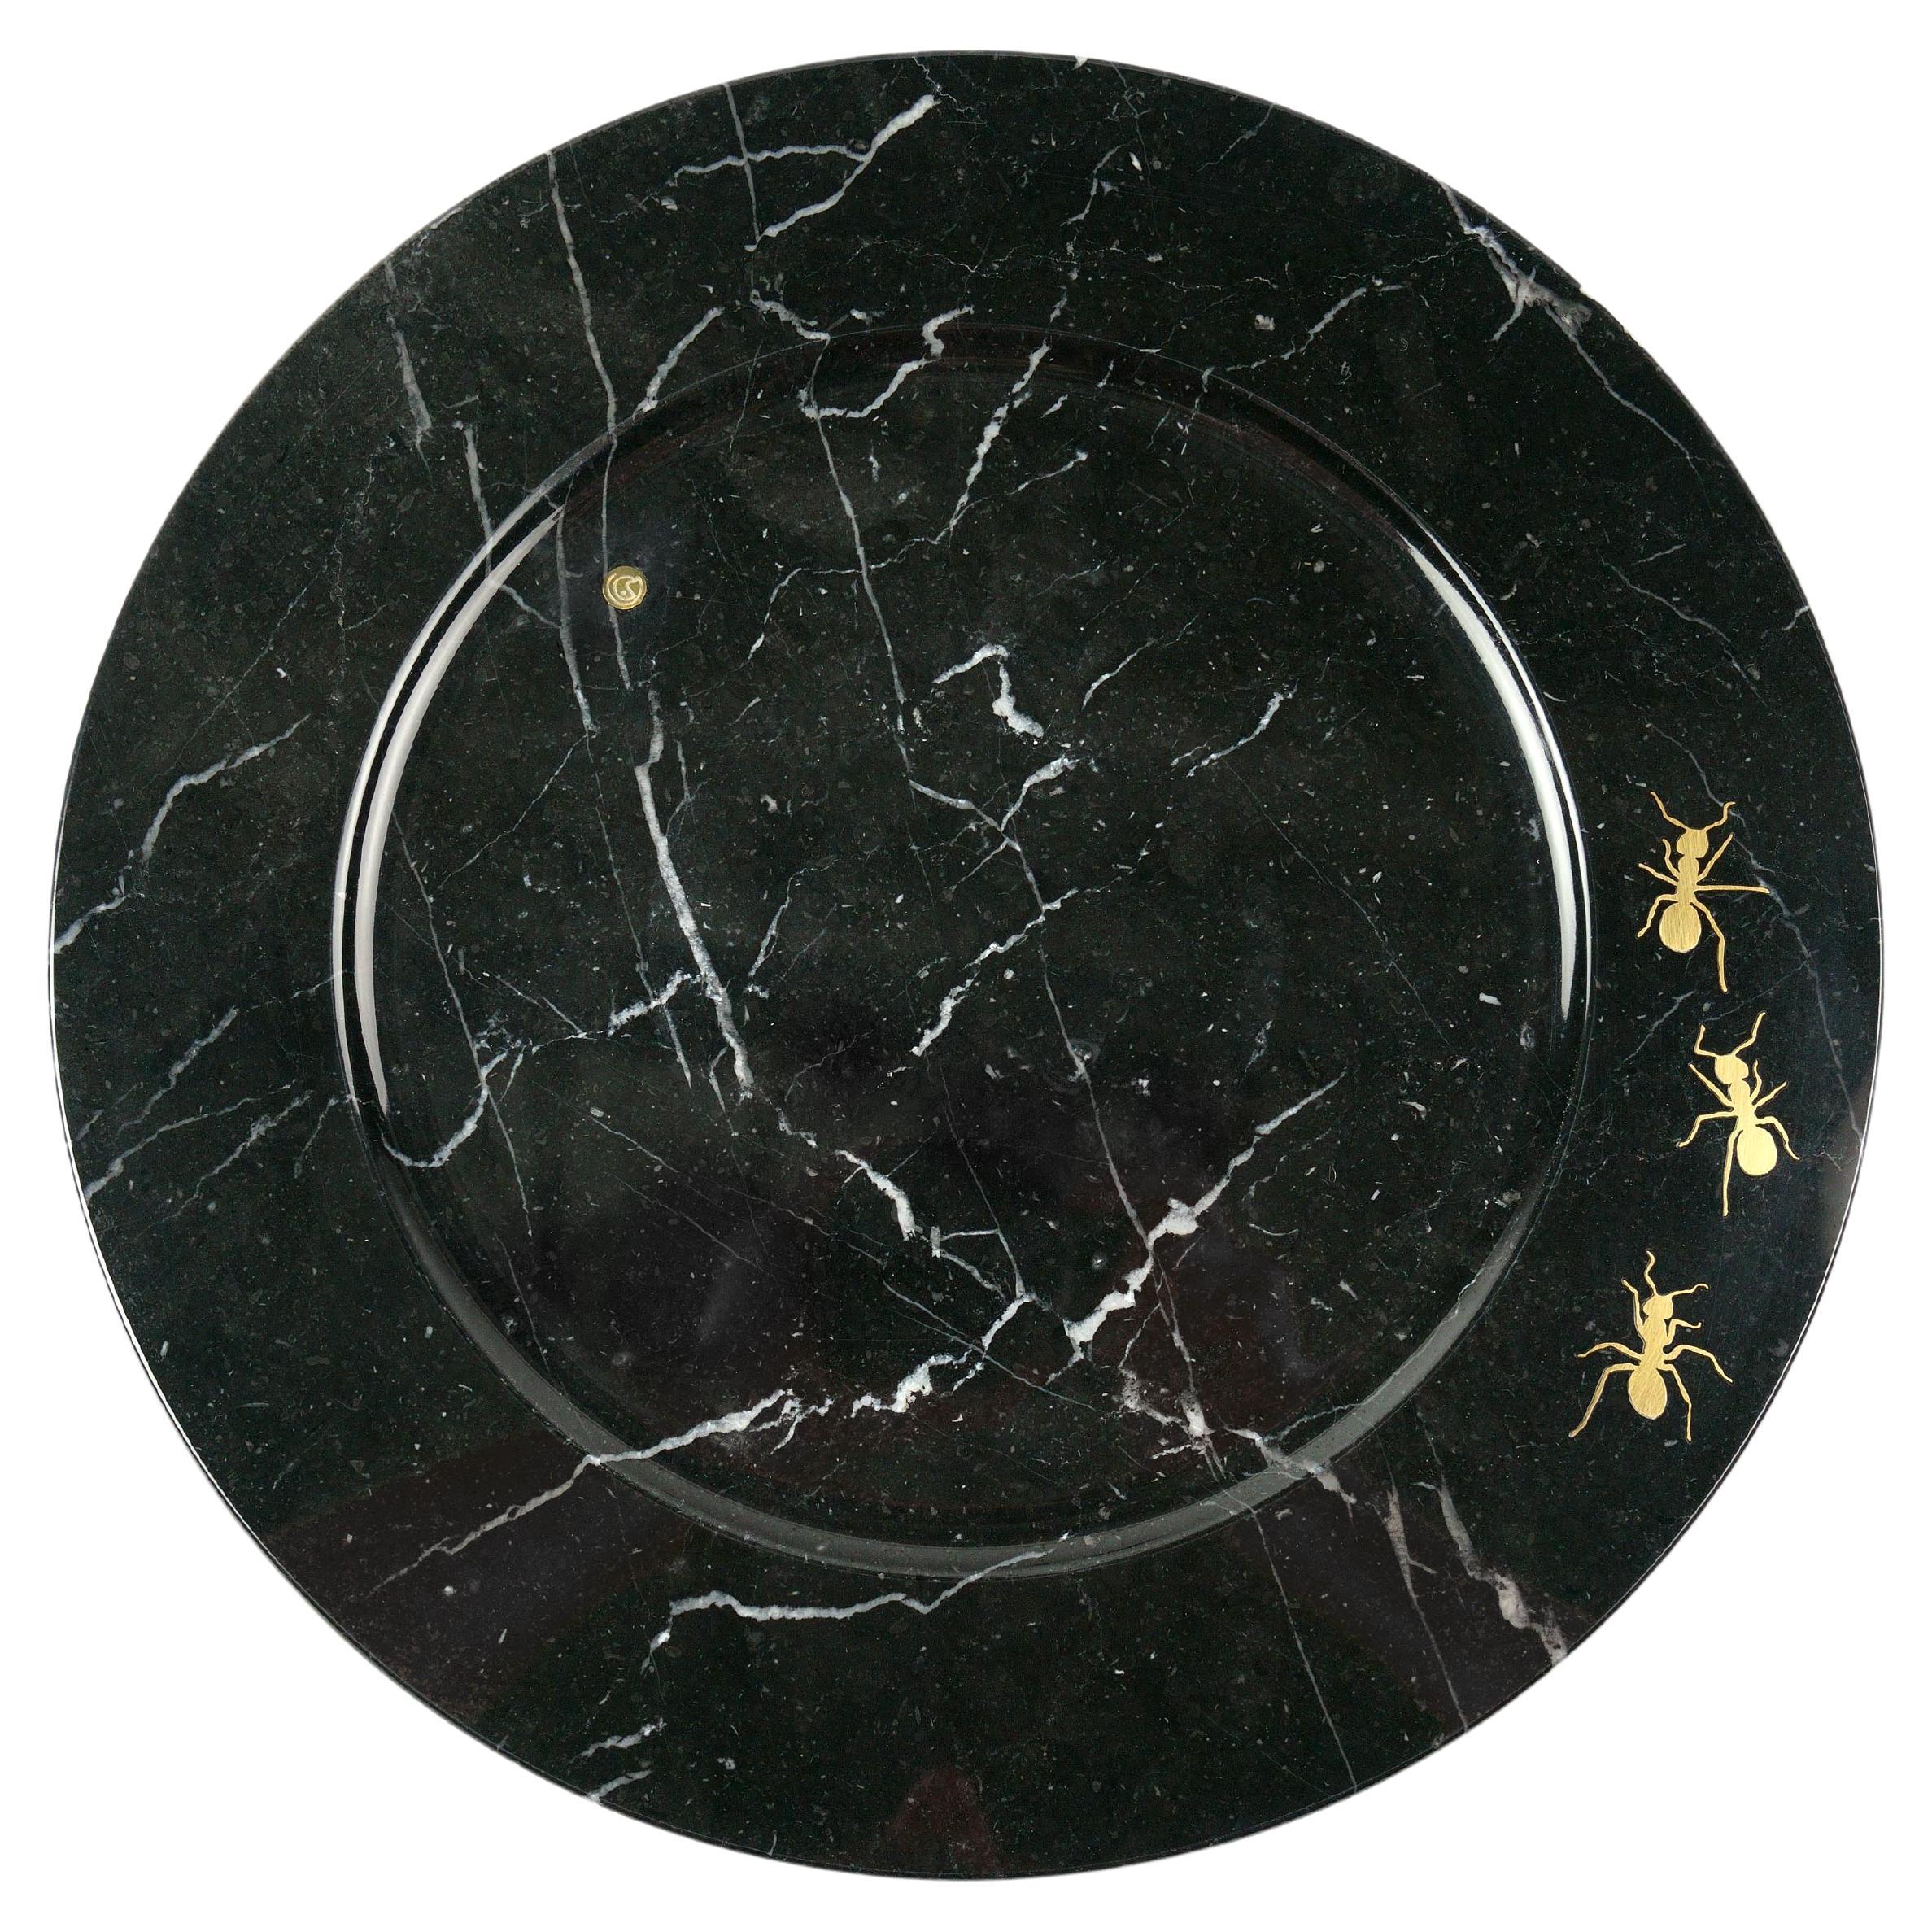 
Hand carved charger plate from black Marquinia marble with 3 brass ants inlay. Multiple use as charger plates, plates, platters and placers. Dimensions: D 33, H 1.9 cm.

Dimensions: D 33, H 1.9 cm. Available in different marbles, onyx and